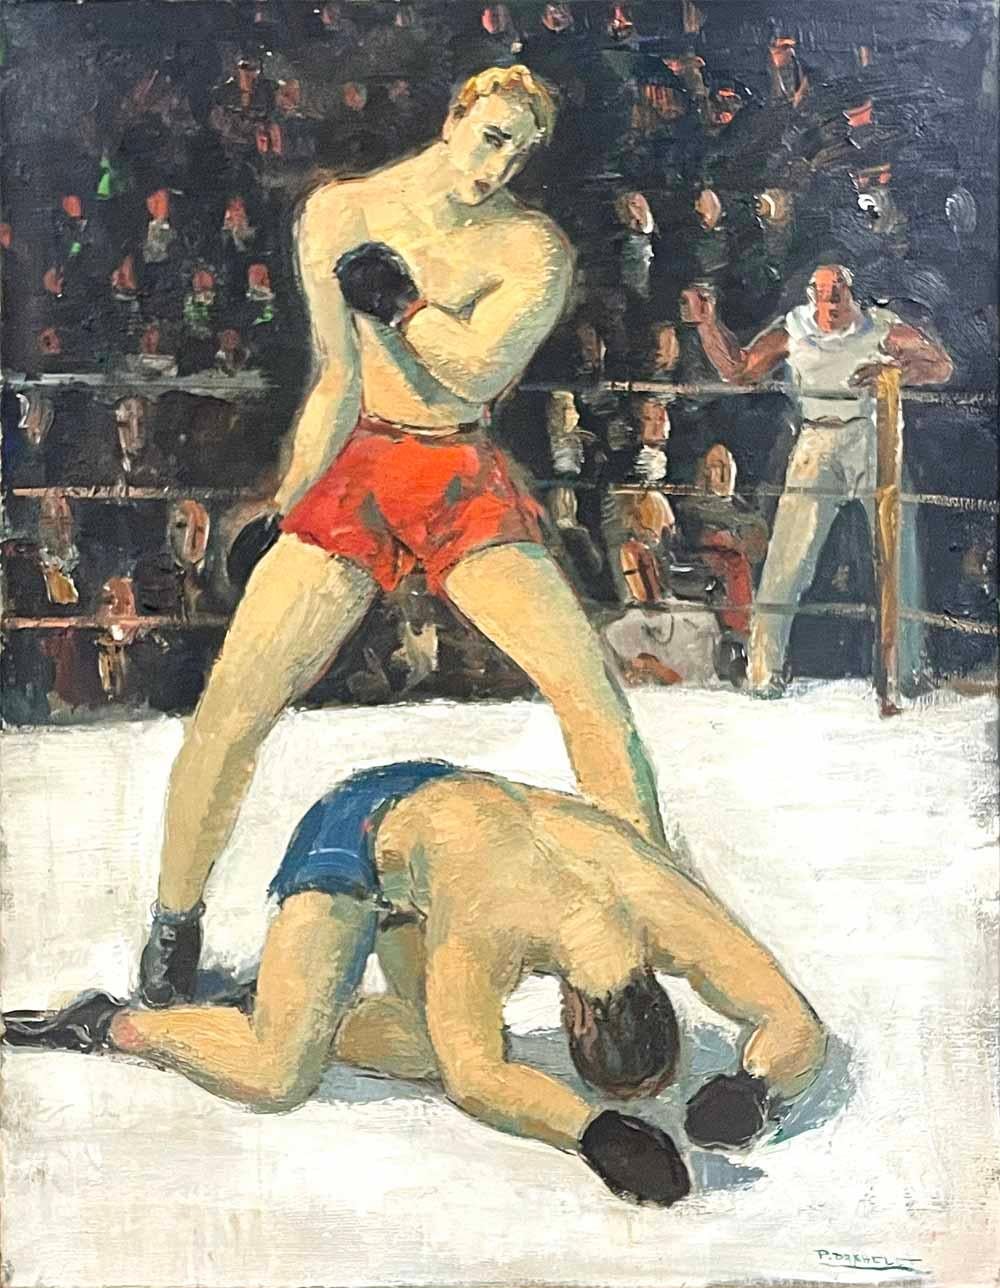 This dramatic depiction of two boxers in the ring, with the winning boxer standing over his opponent after a knockout, was painted by Paul Daxhelet in 1936, possibly at the Berlin Olympics. Daxhelet is mostly known for his scenes from Africa in